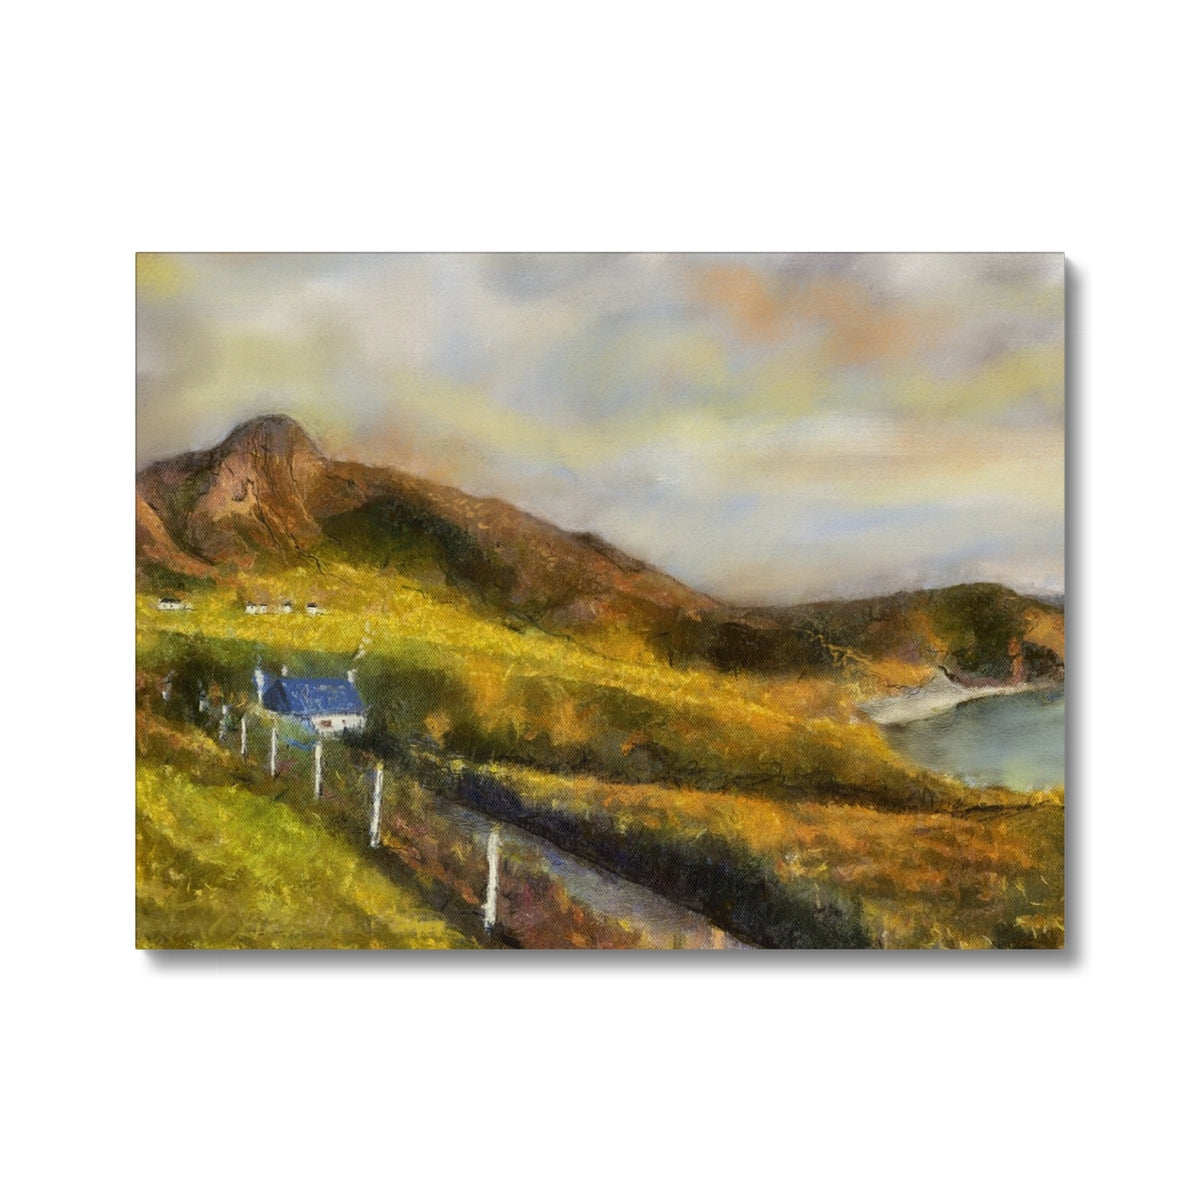 Coldbackie Painting | Canvas From Scotland-Contemporary Stretched Canvas Prints-Scottish Highlands & Lowlands Art Gallery-24"x18"-Paintings, Prints, Homeware, Art Gifts From Scotland By Scottish Artist Kevin Hunter